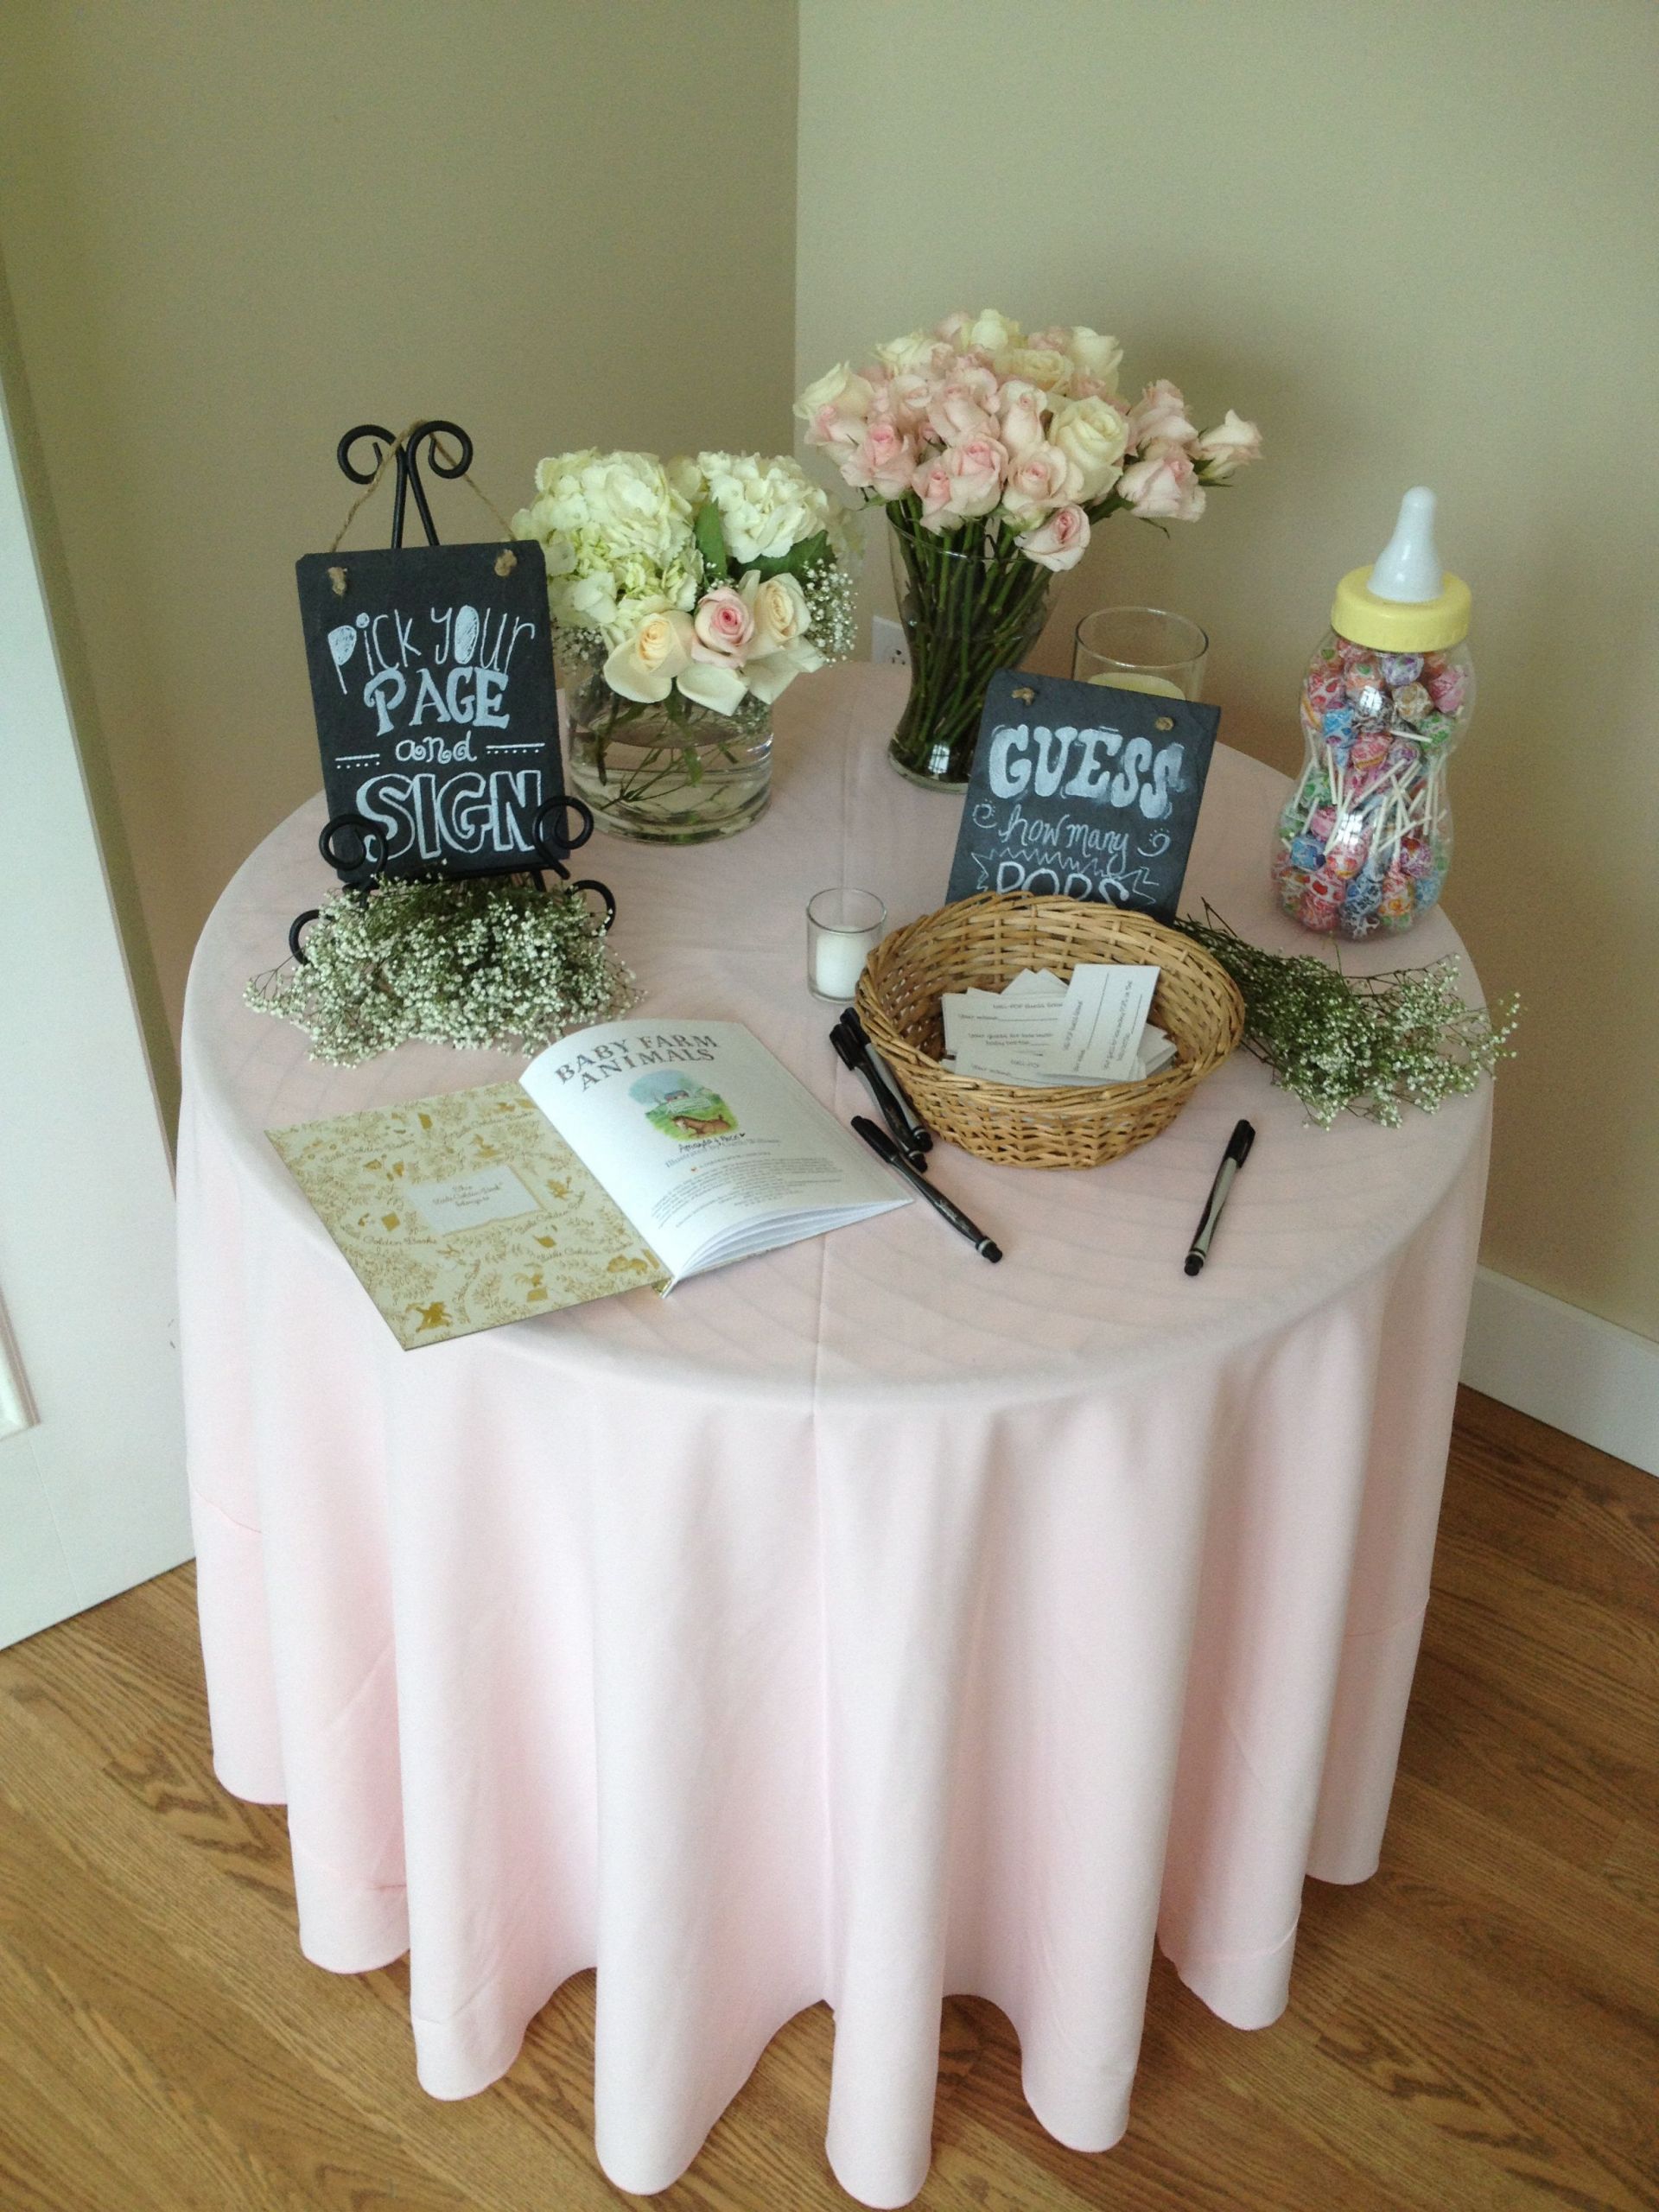 Decorating Ideas For Baby Shower Gift Table
 Entrance Table at a baby shower